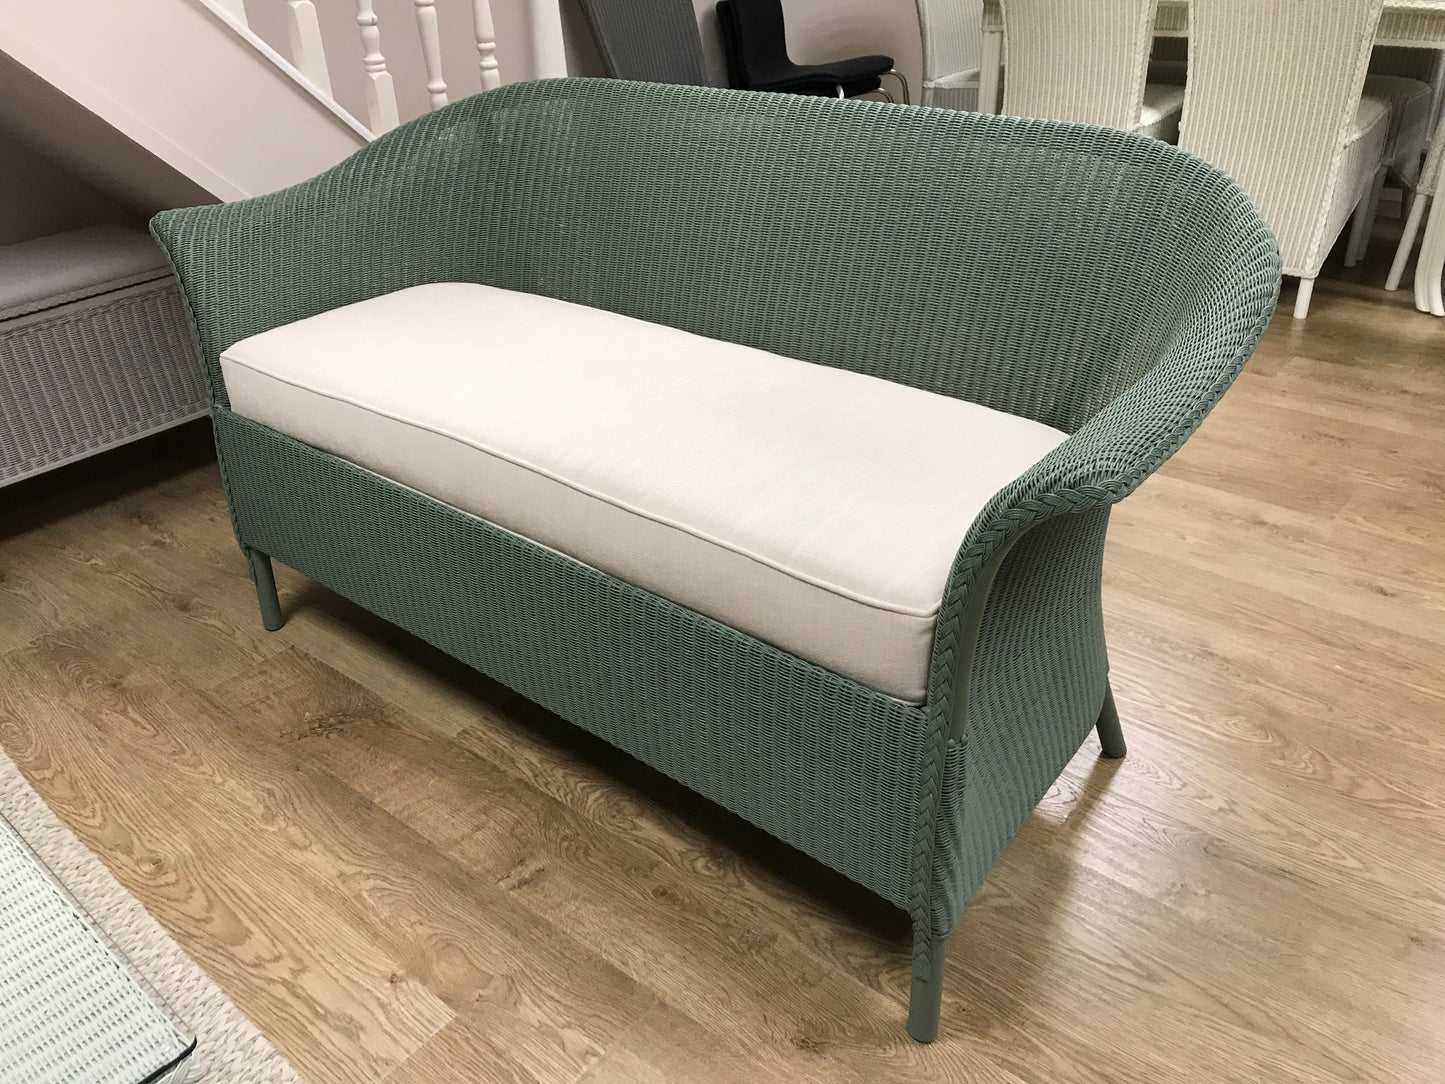 Fairbank 2 seat sofa with drop in seat cushion in Sage (Available:1)